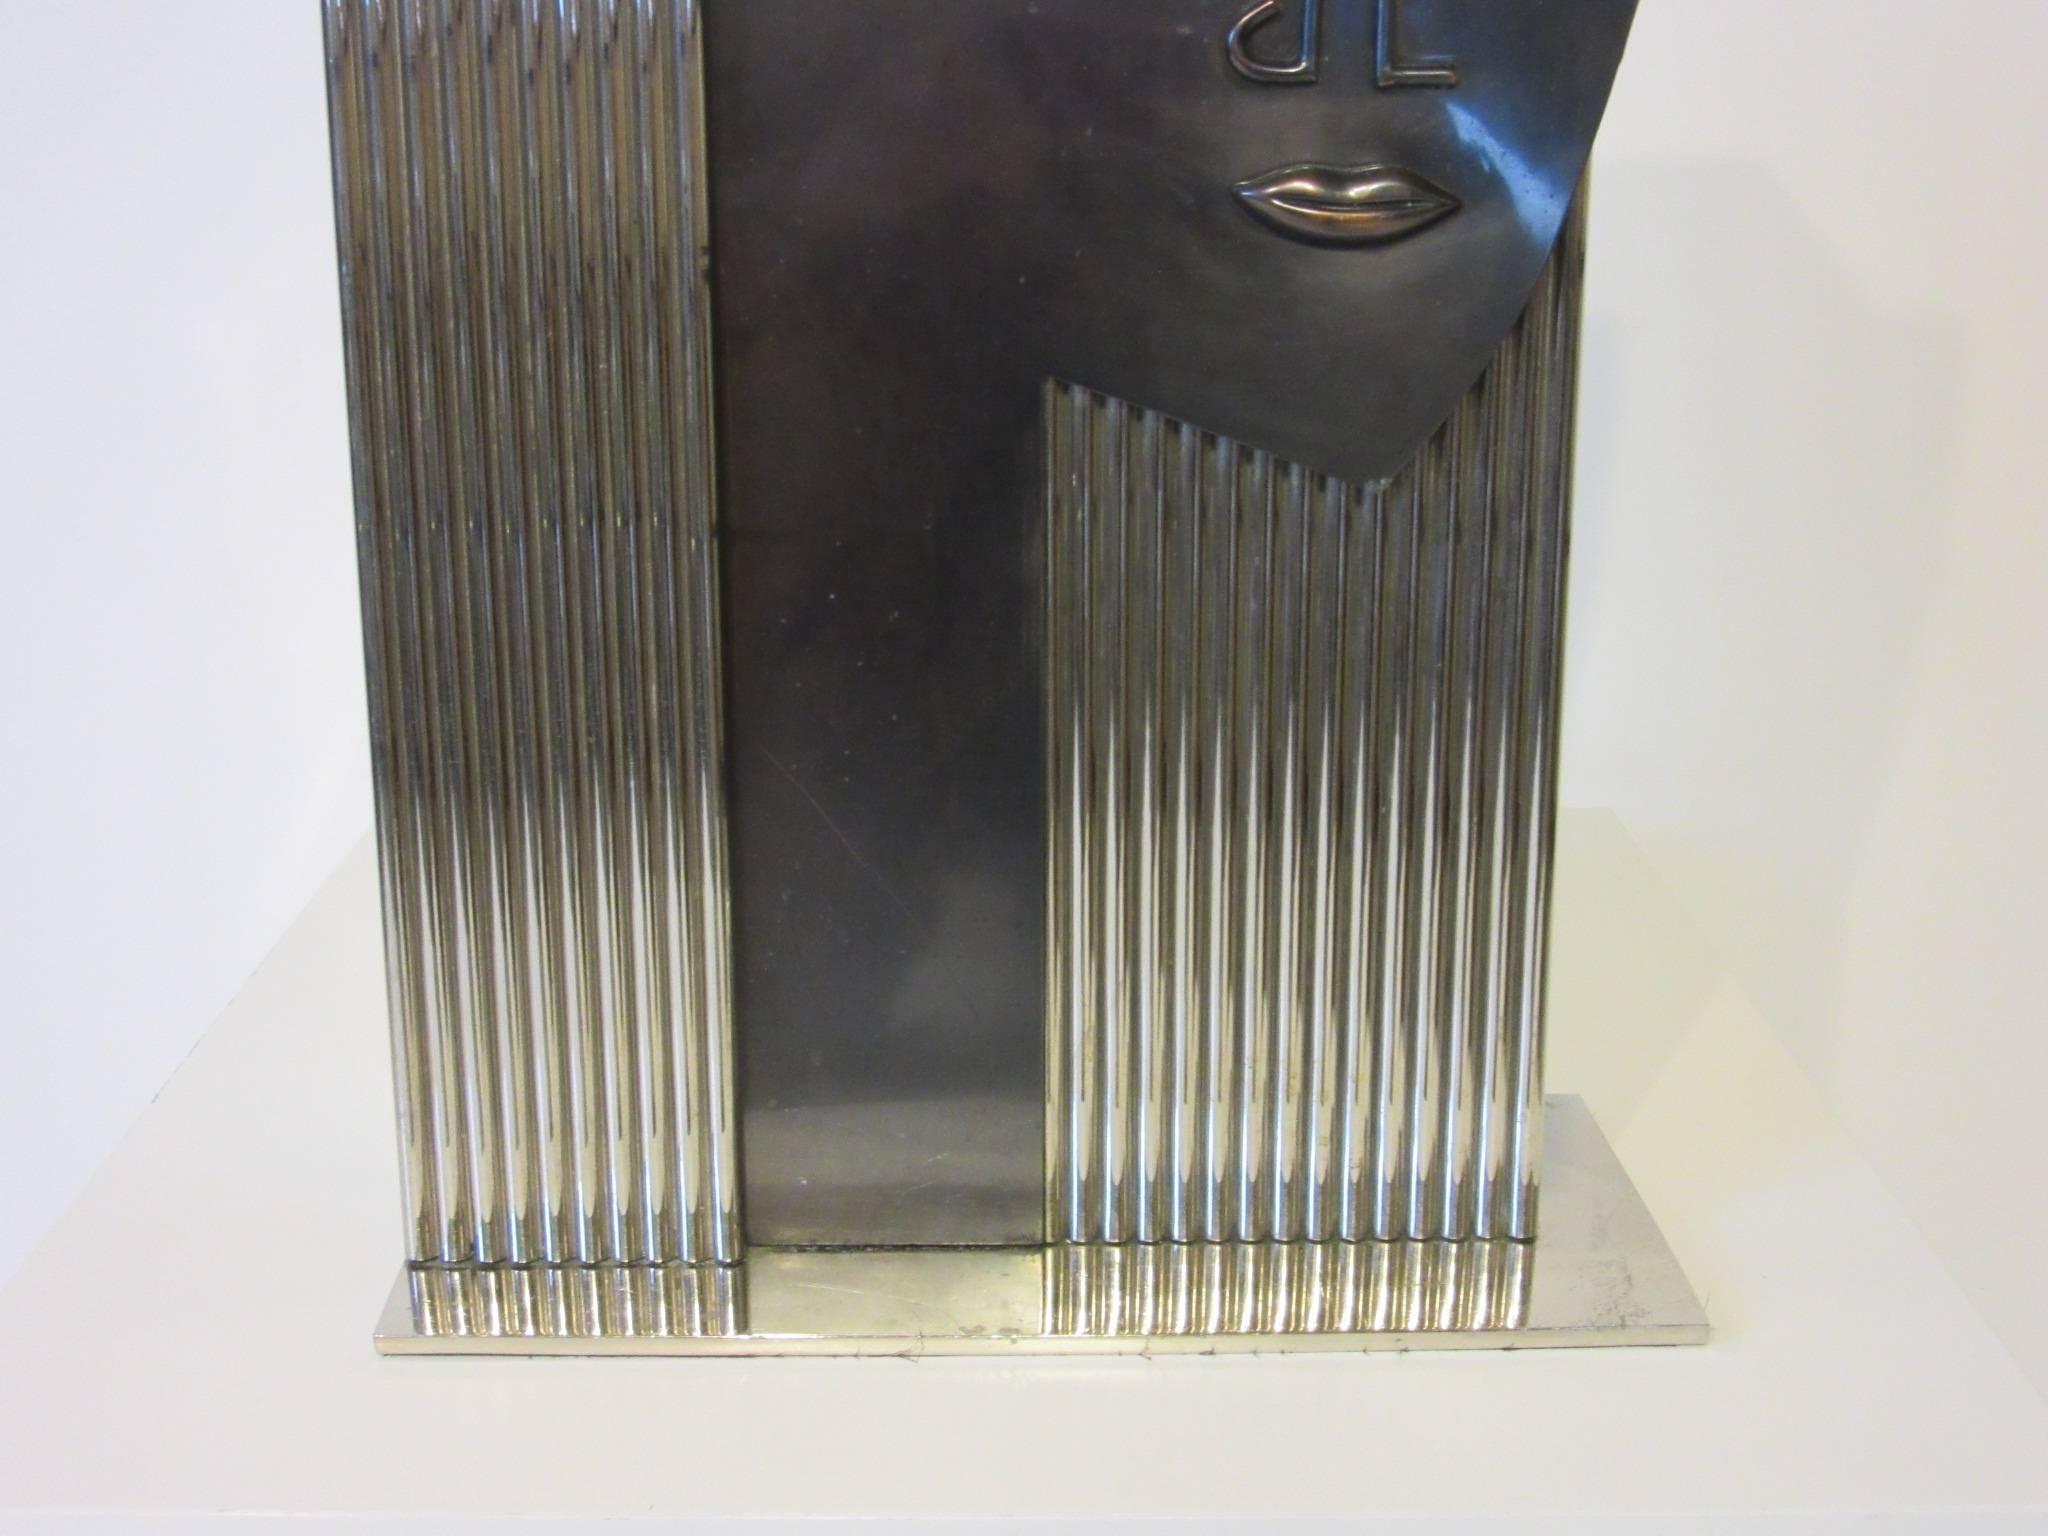 Unknown Modern Styled Chrome Face Vase Sculpture